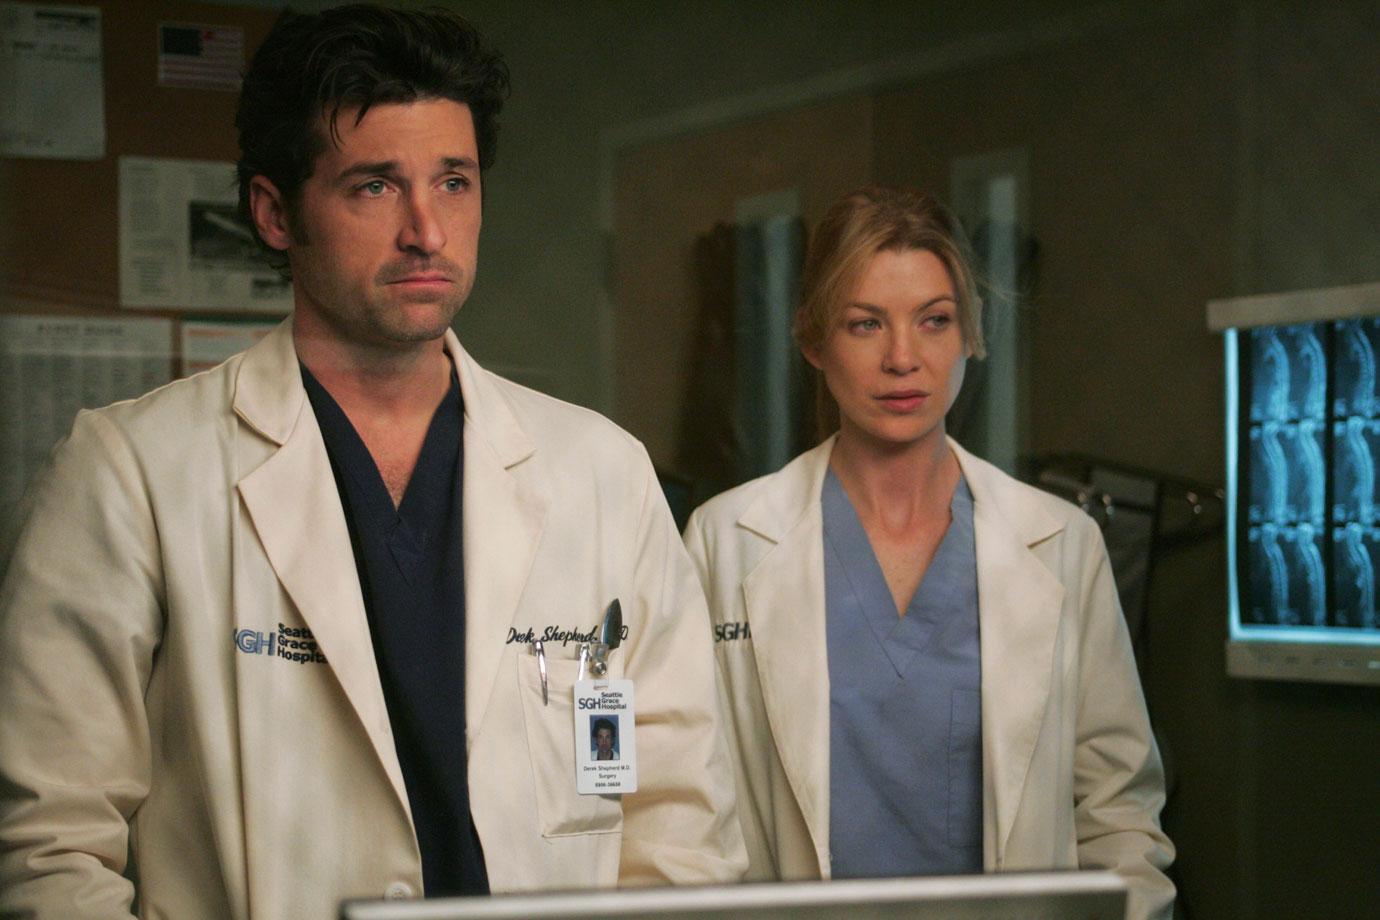 Grey's Anatomy Cast Scandalous Reasons For Leaving Show